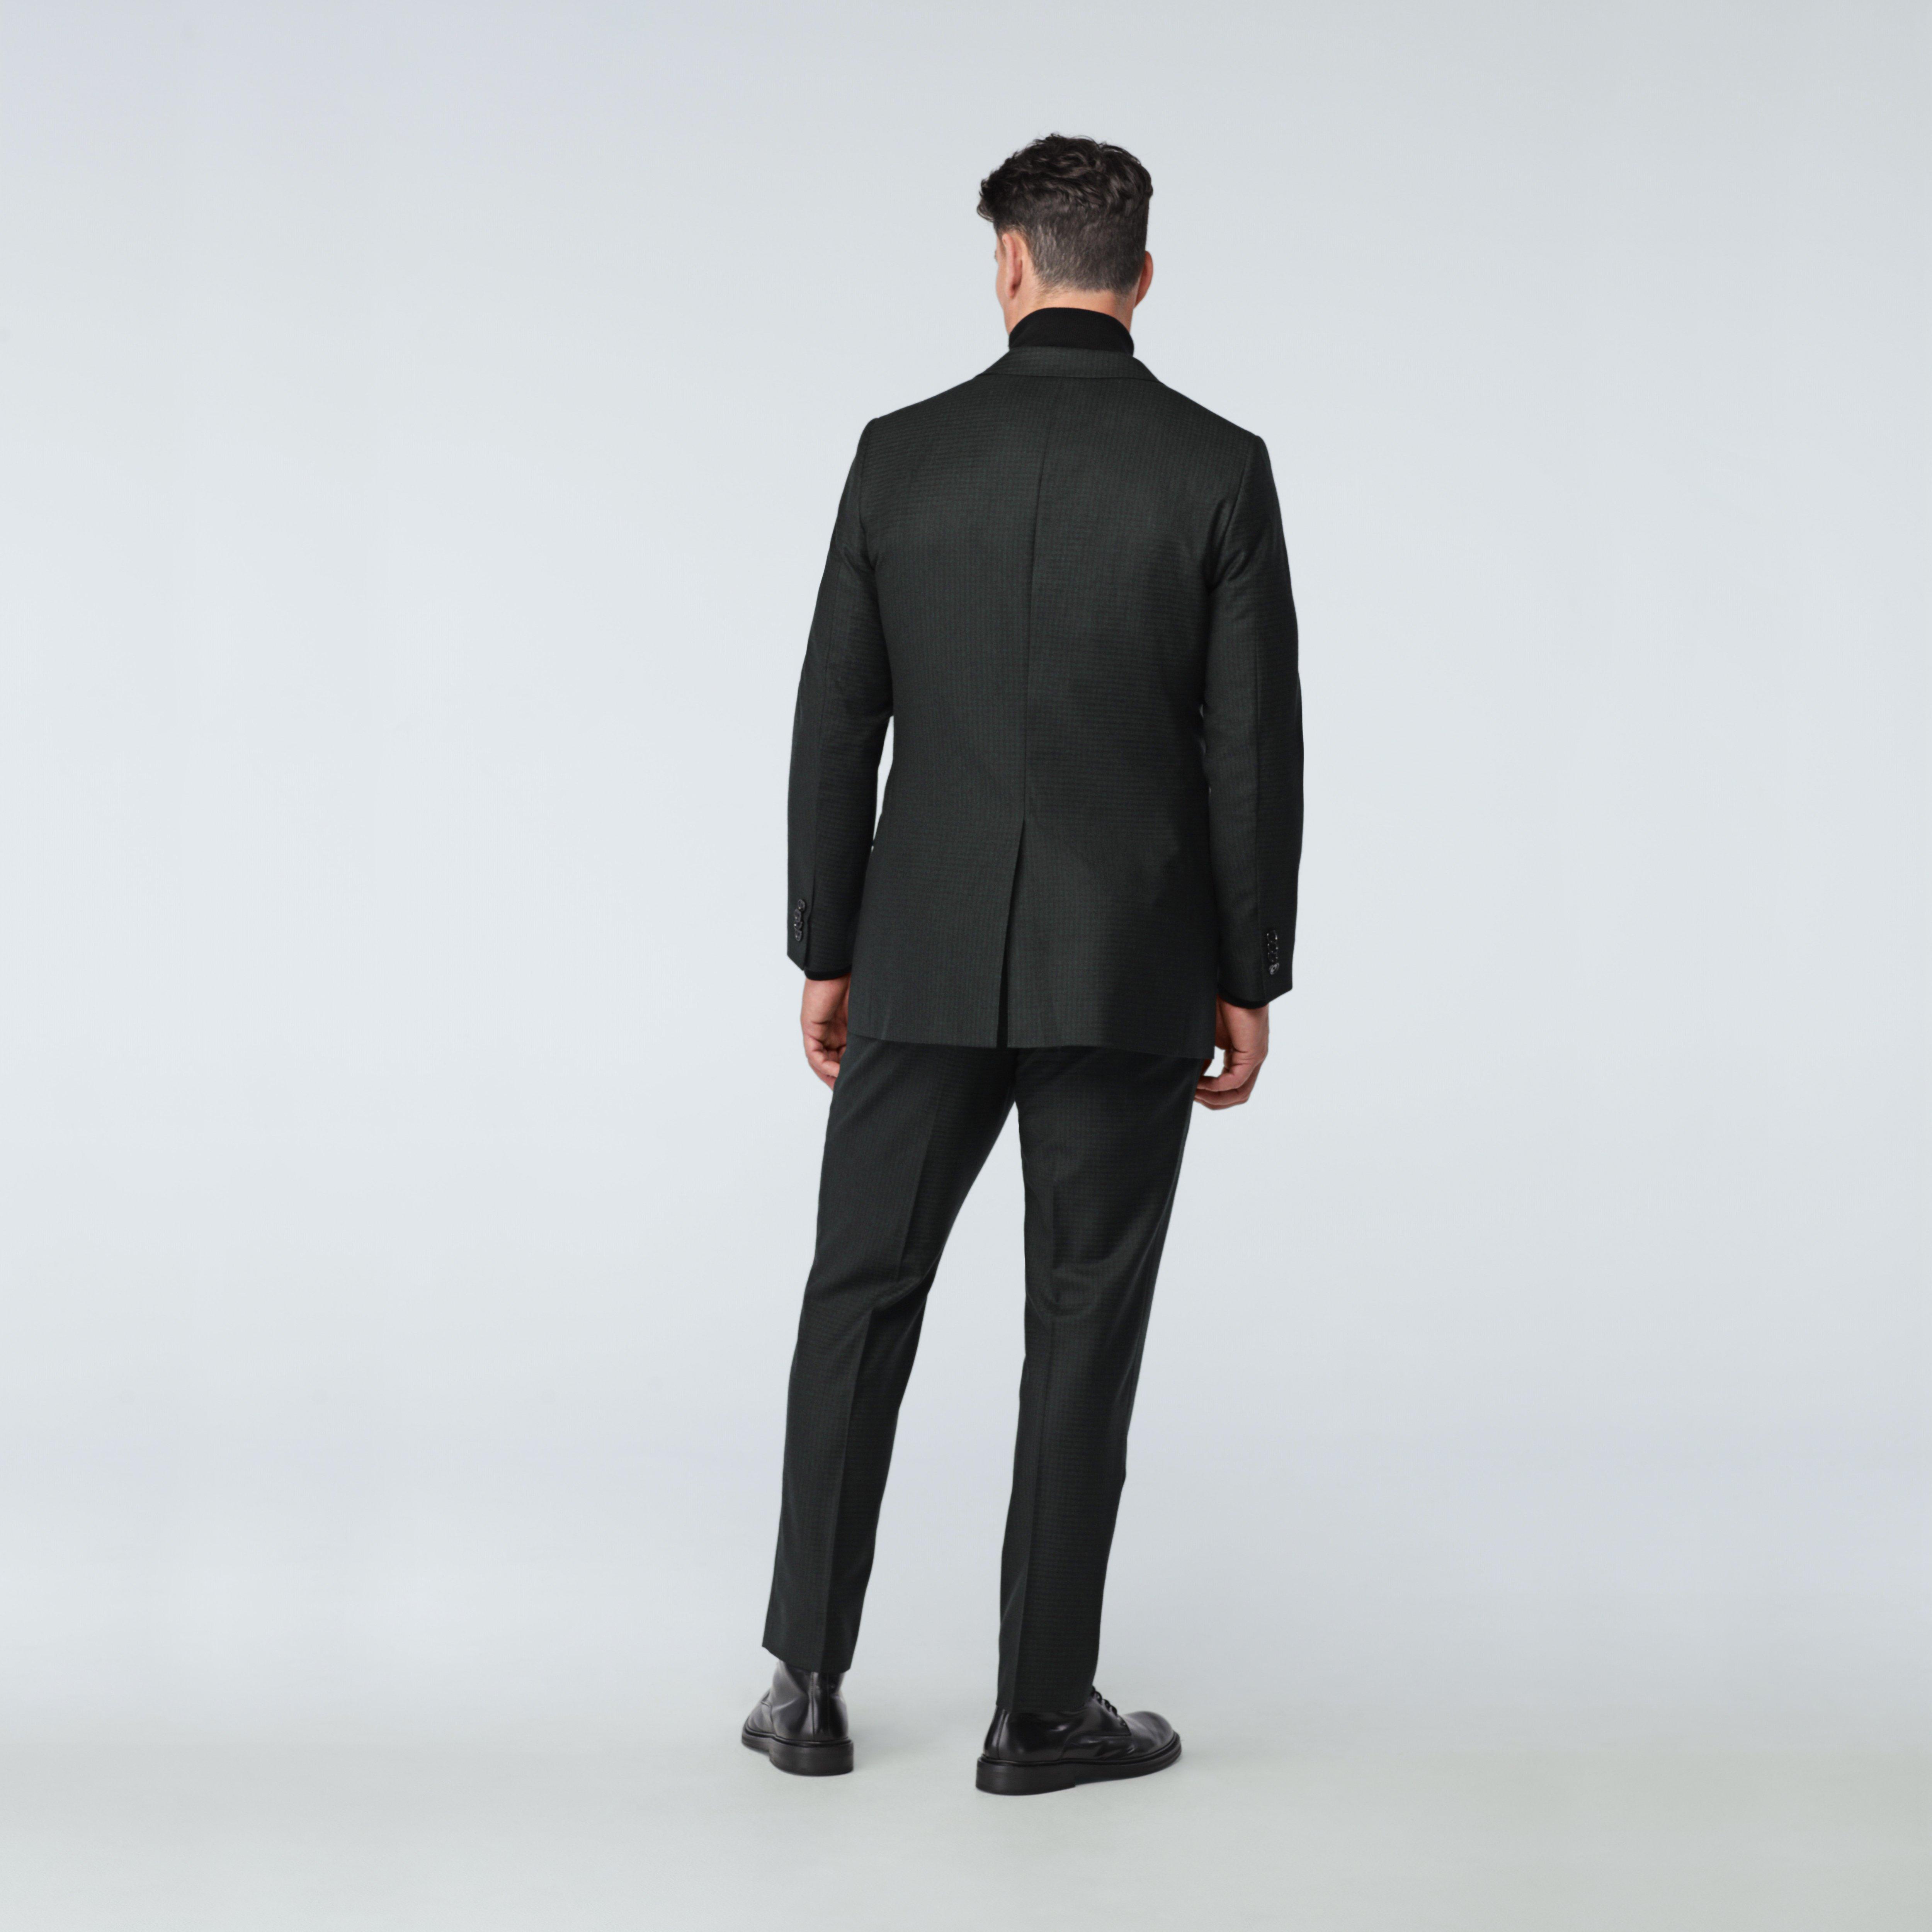 Custom Suits Made For You - Monterosso Check Hunter Green Suit | INDOCHINO